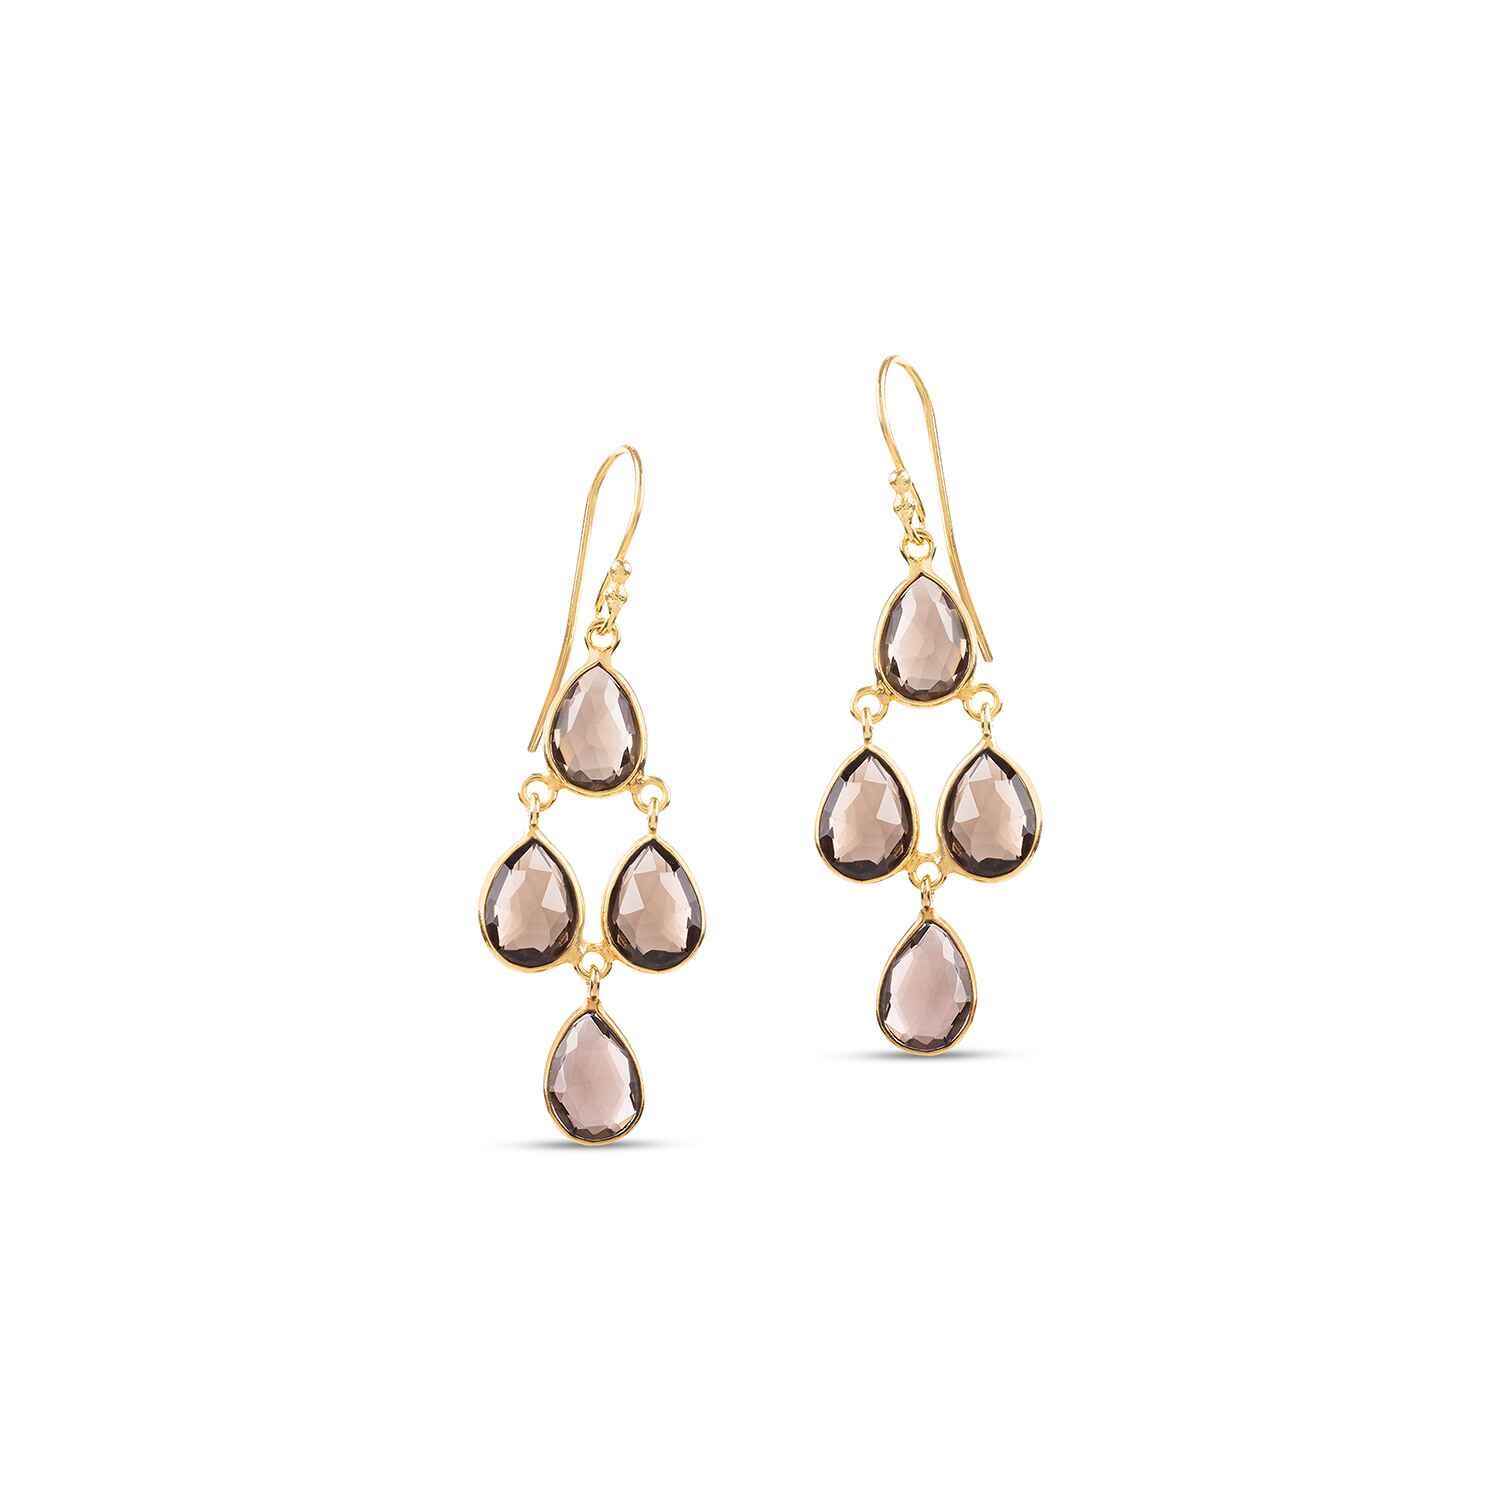 The Sophia Smokey Quartz Chandelier Earrings feature four pear shaped multifaceted vintage gemstones. Simple, elegant but standout these sustainable earrings are a must-have.